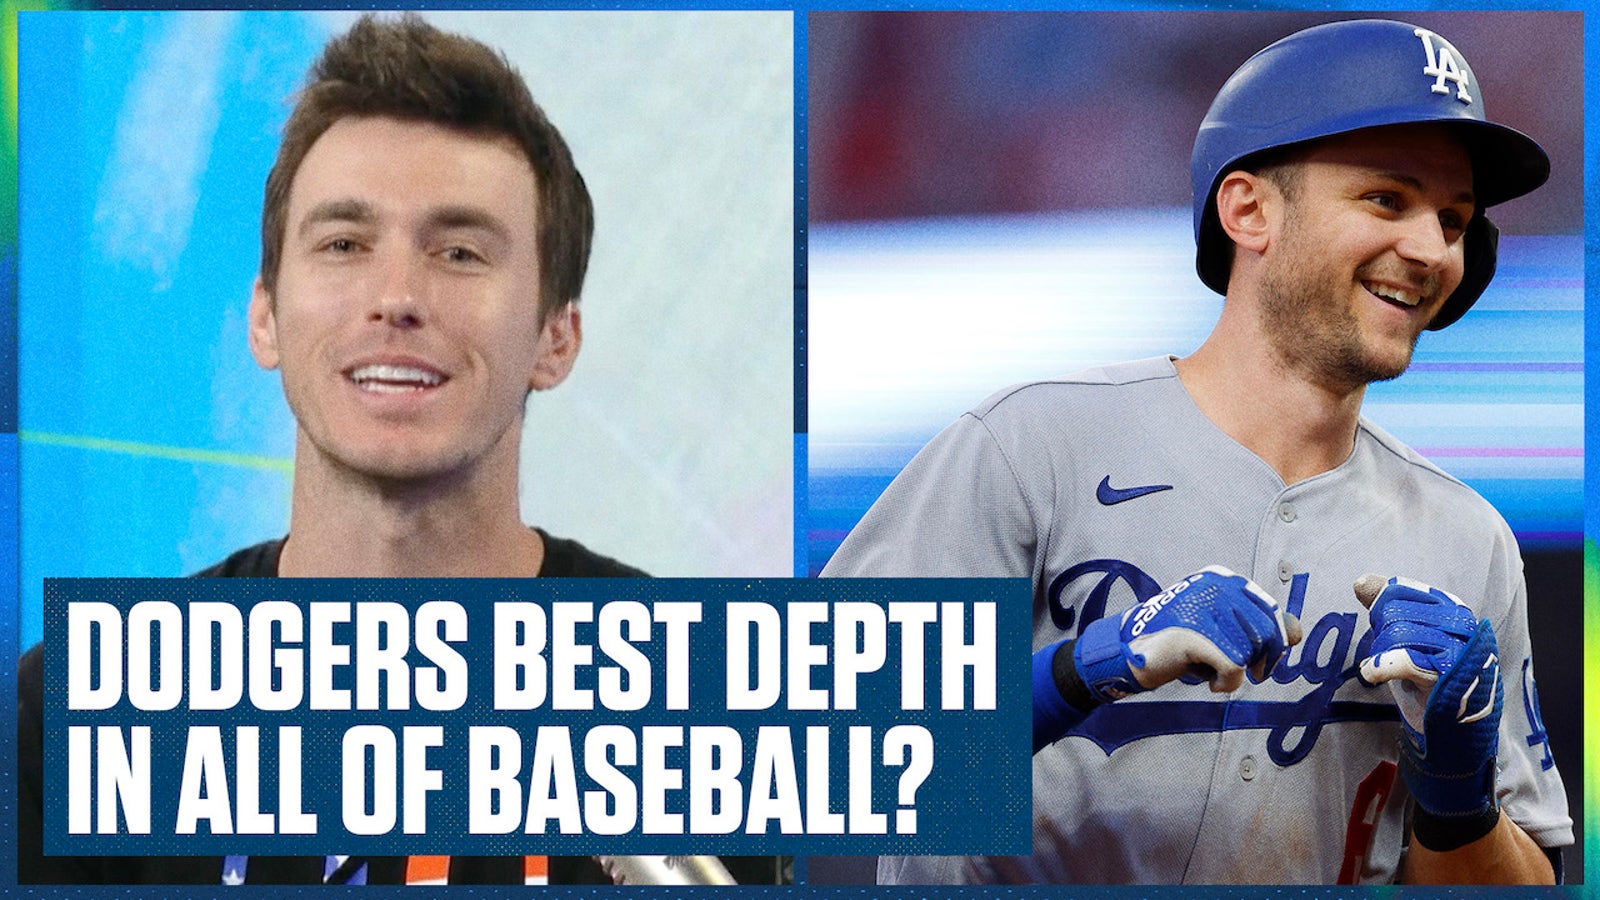 Dodgers' depth is unparalleled in baseball